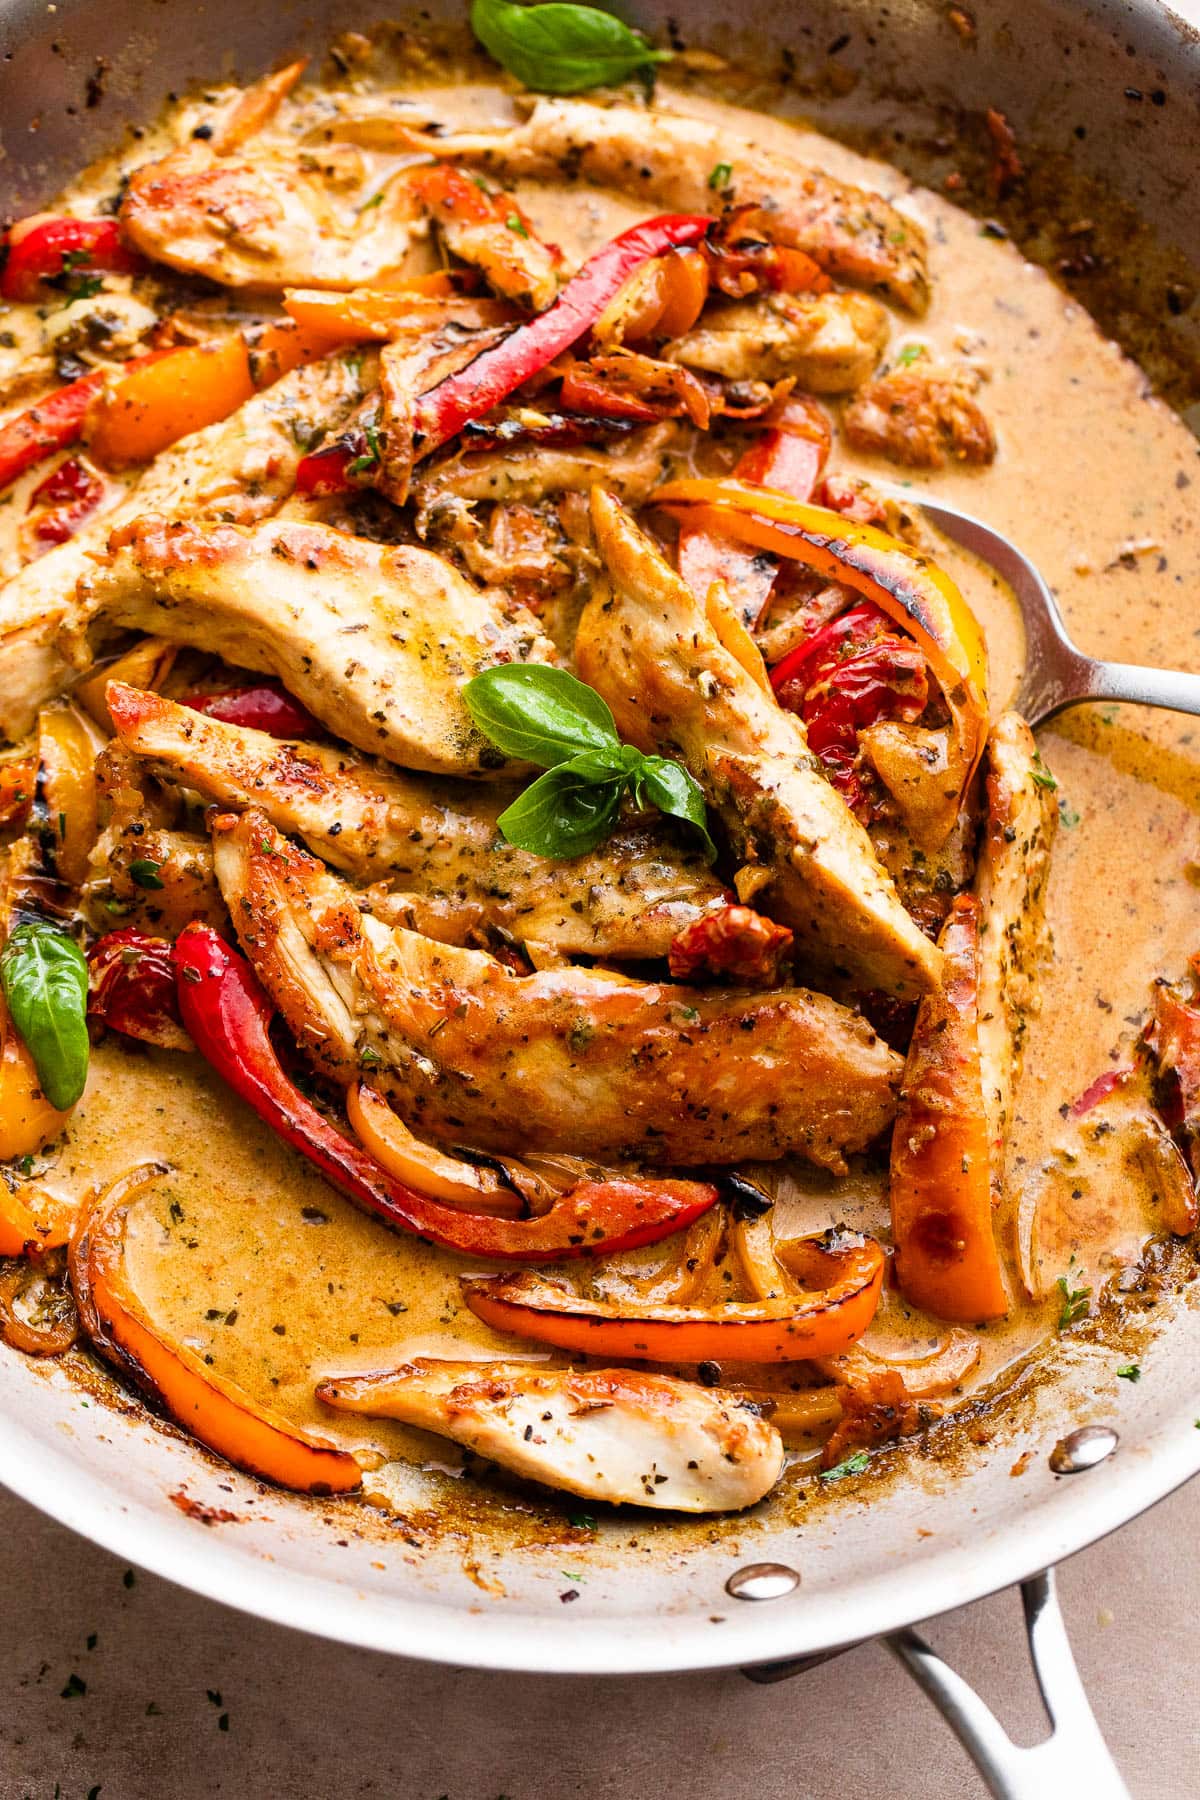 Sliced chicken and peppers in a creamy sauce cooking in a skillet.